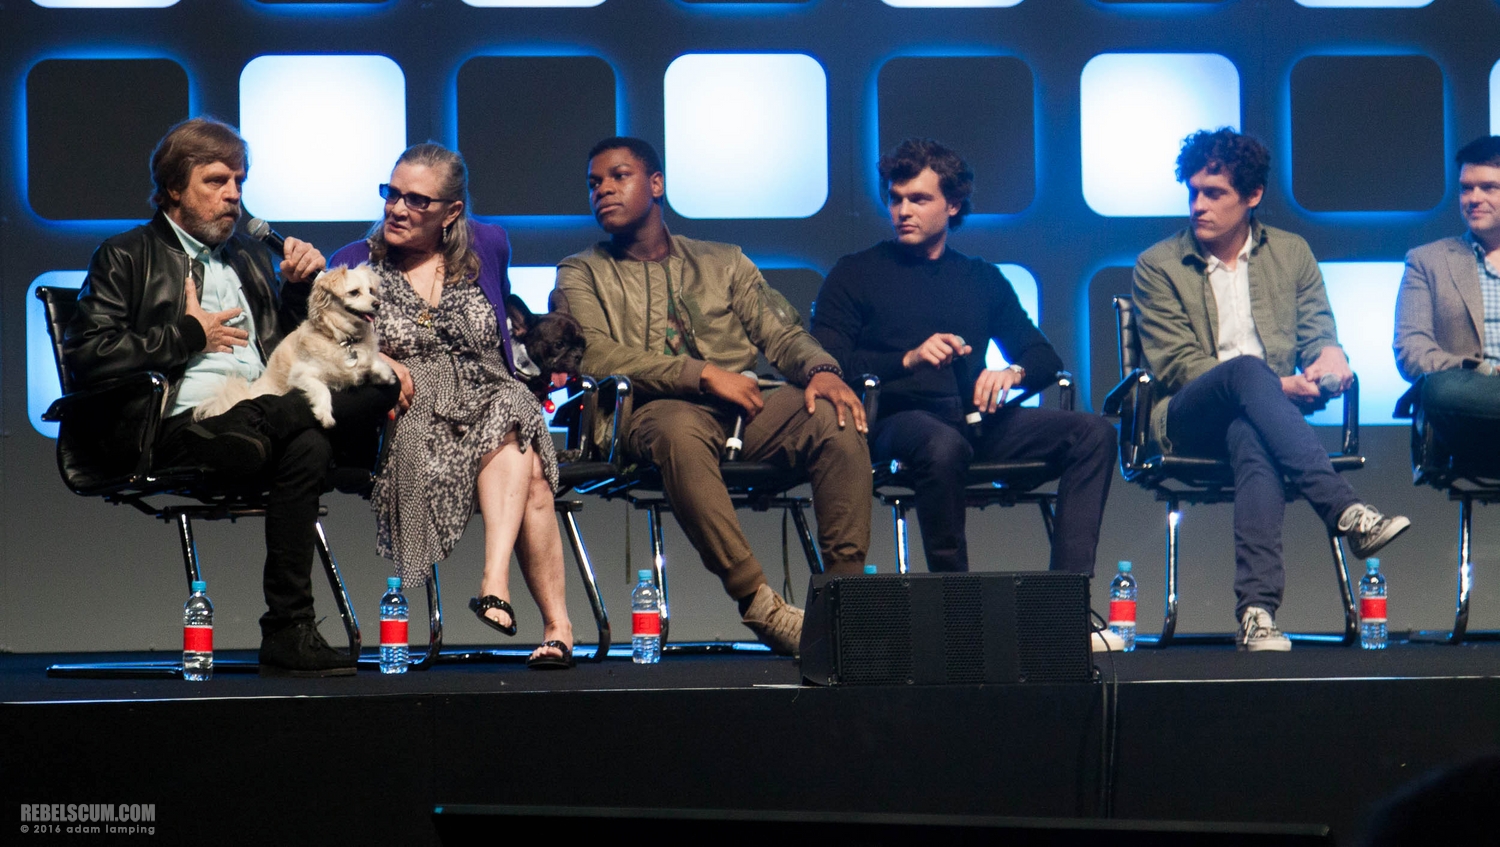 star-wars-celebration-2016-future-filmmakers-and-closing-ceremony-030.jpg